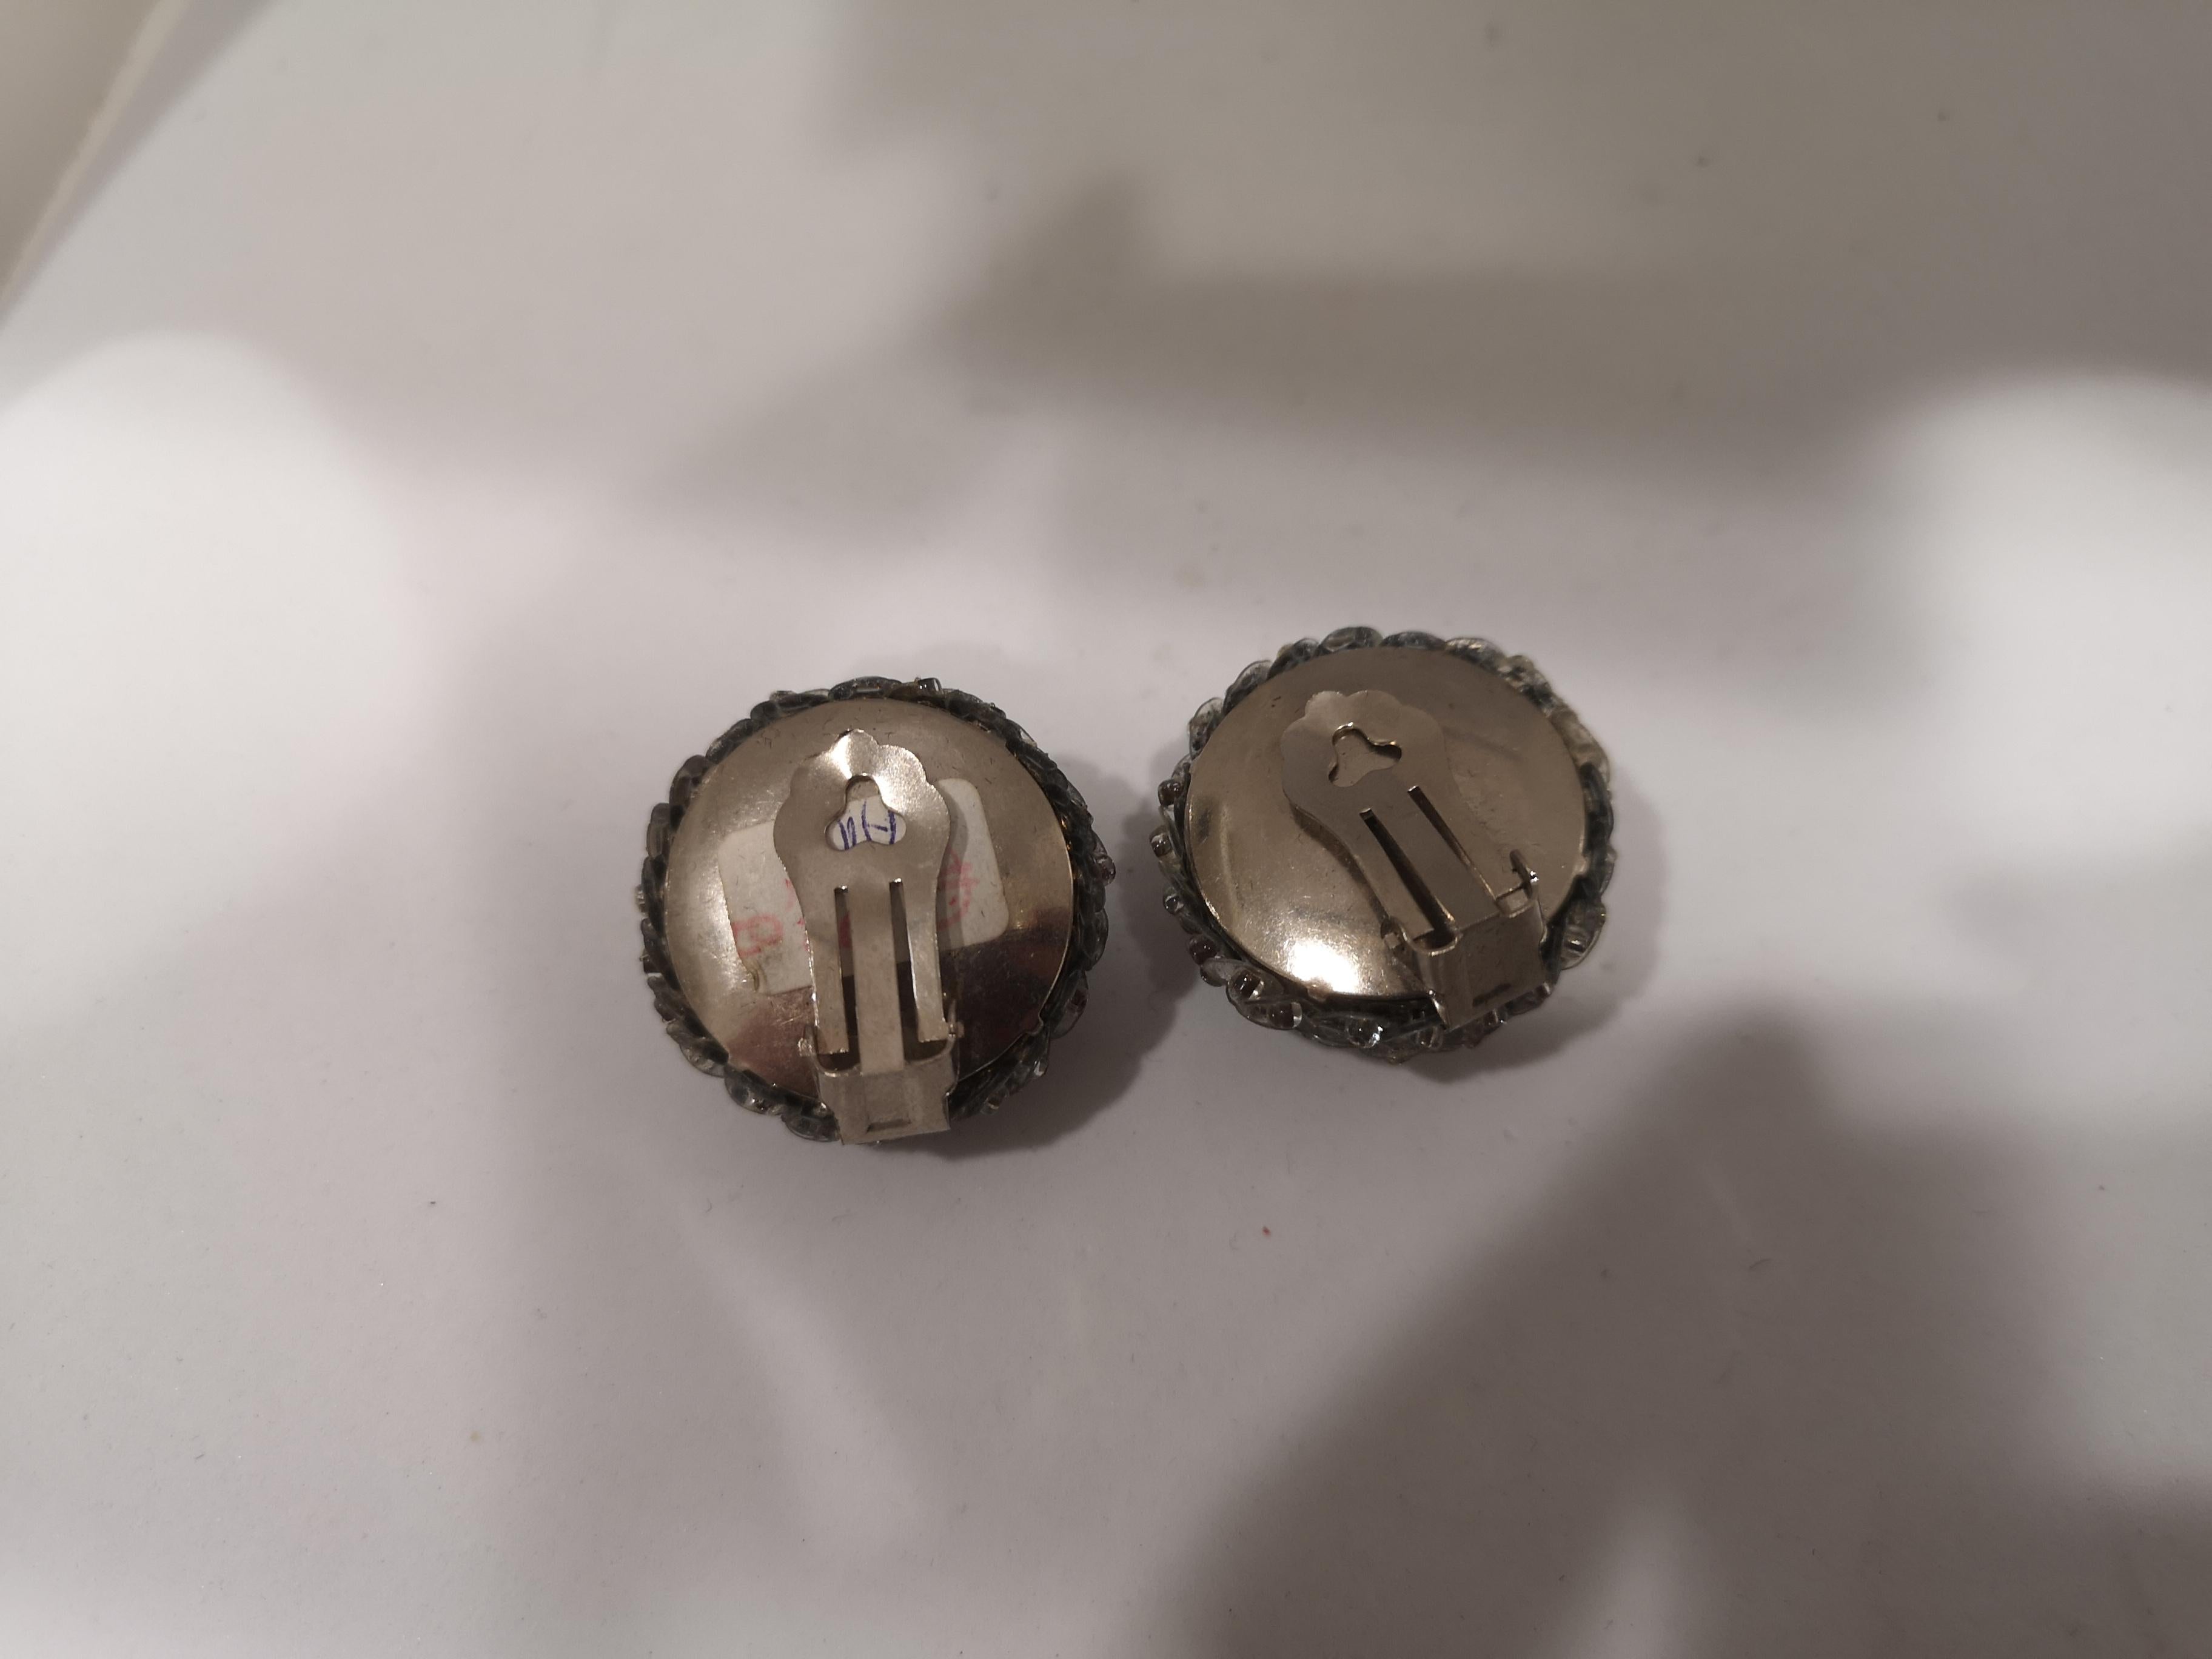 Vintage silver tone with small beads clip on earrings
3x3 cm